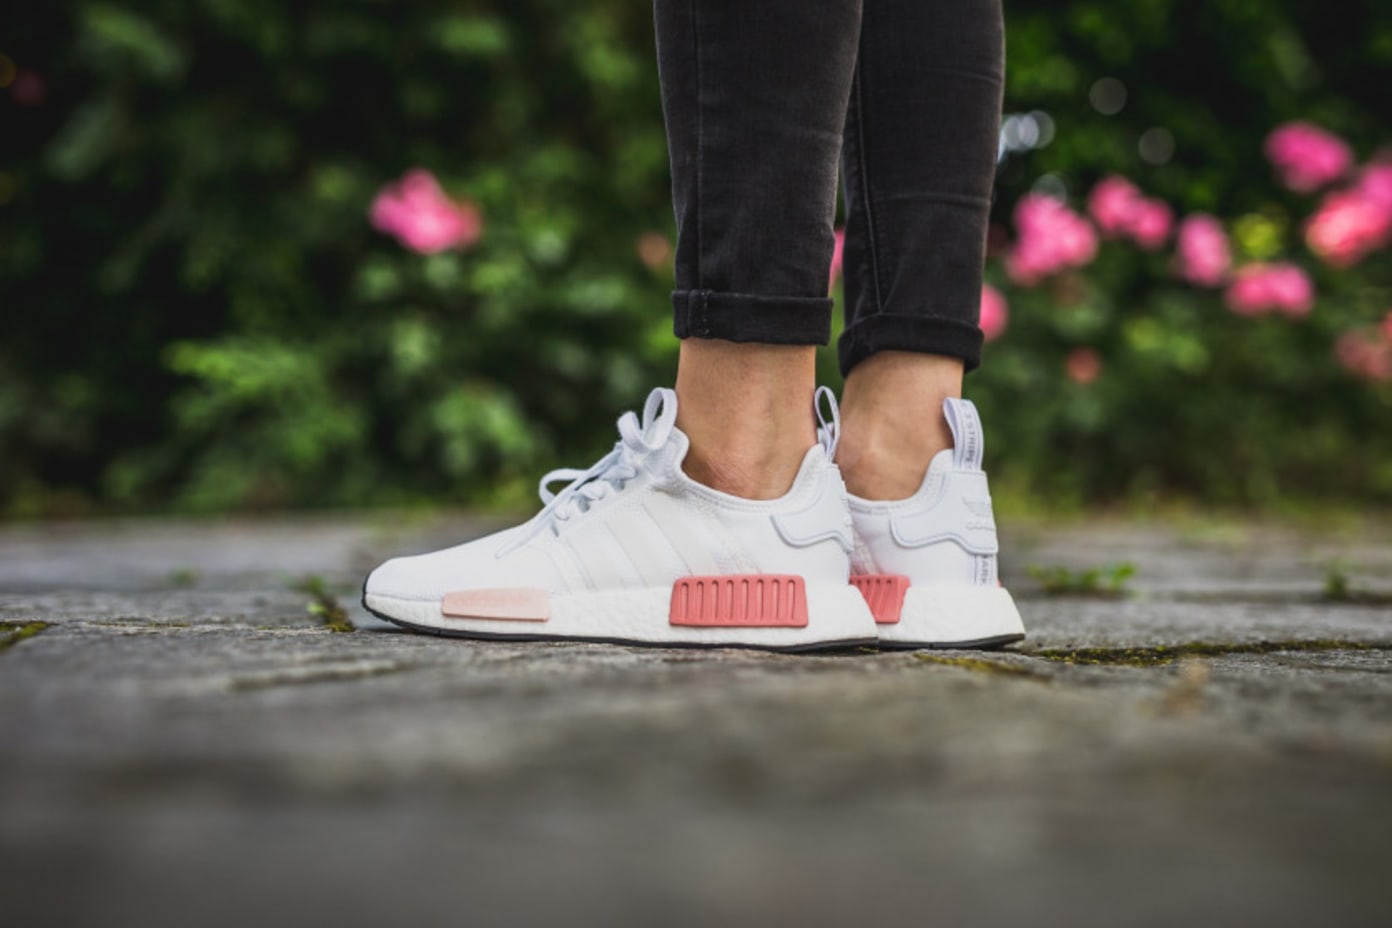 adidas NMD R1 Women's Collection for June 10th